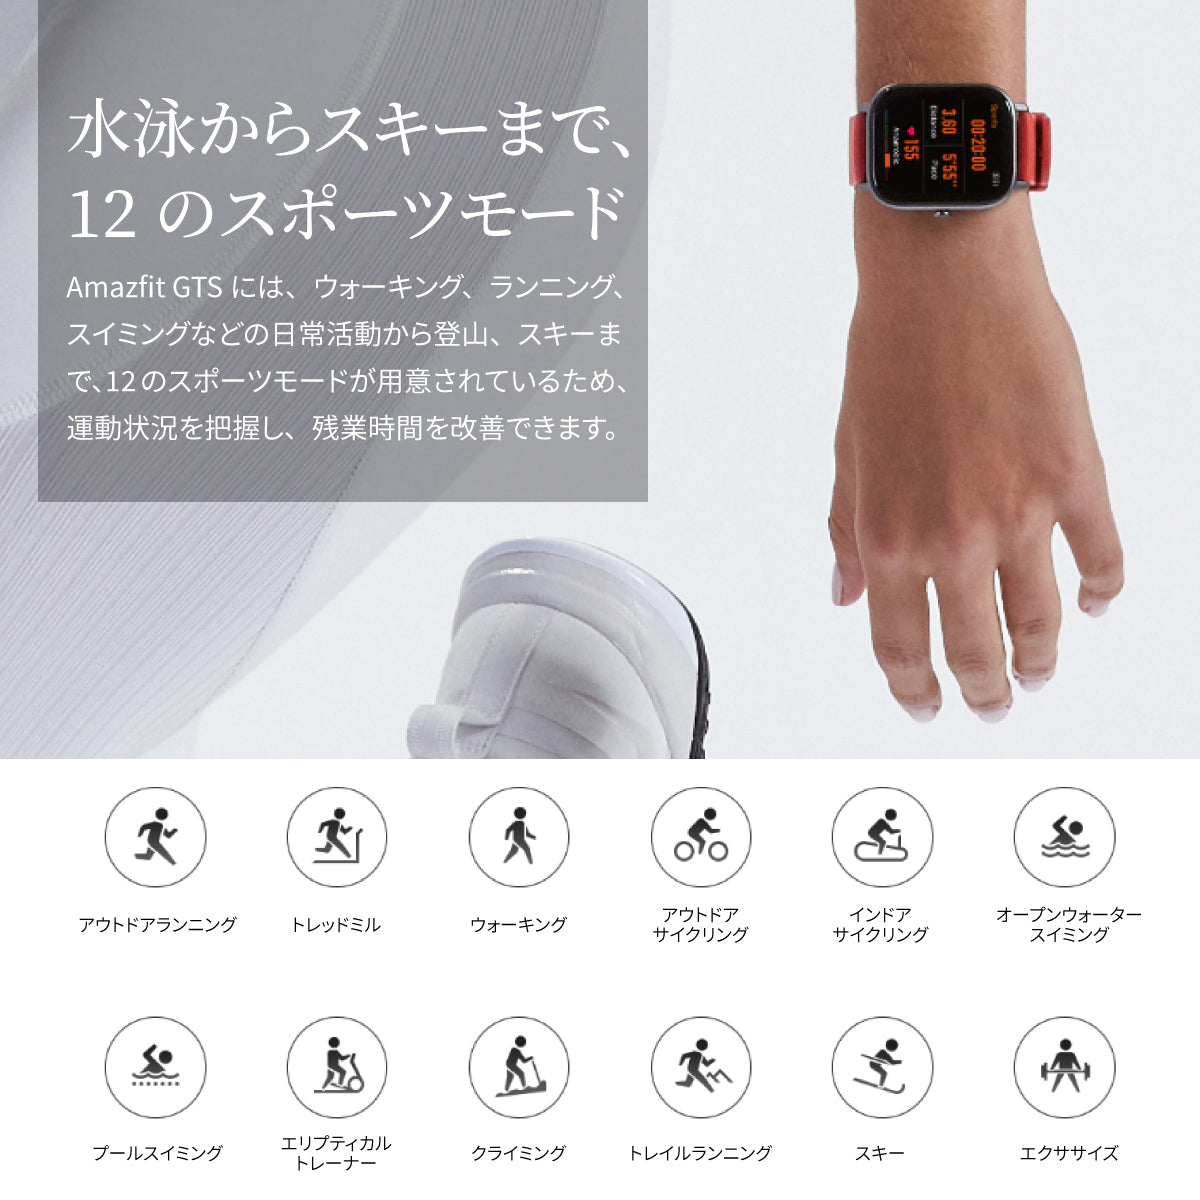 Amazfit GTS 12 built in sports modes